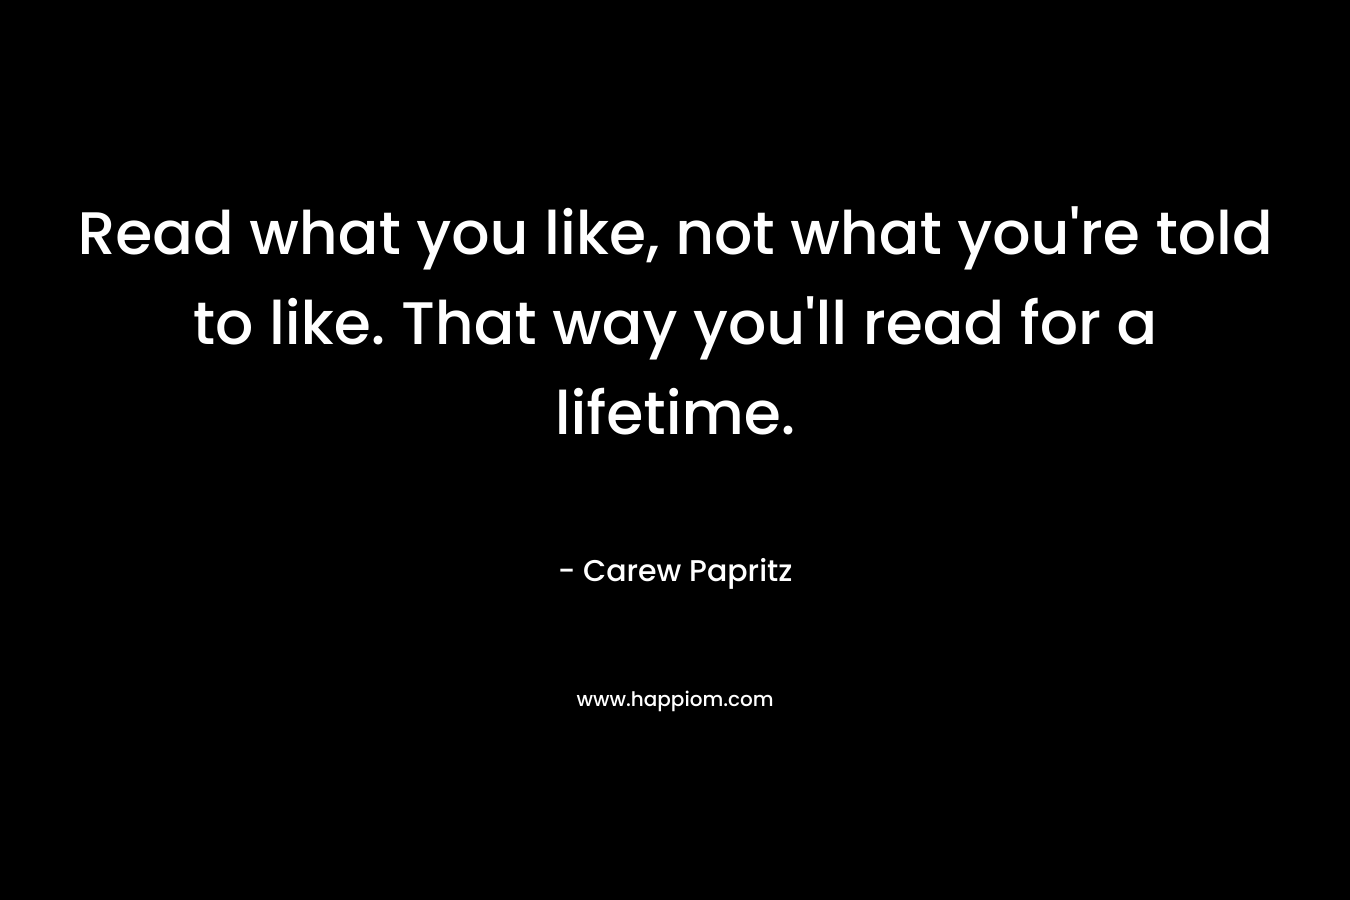 Read what you like, not what you’re told to like. That way you’ll read for a lifetime. – Carew Papritz